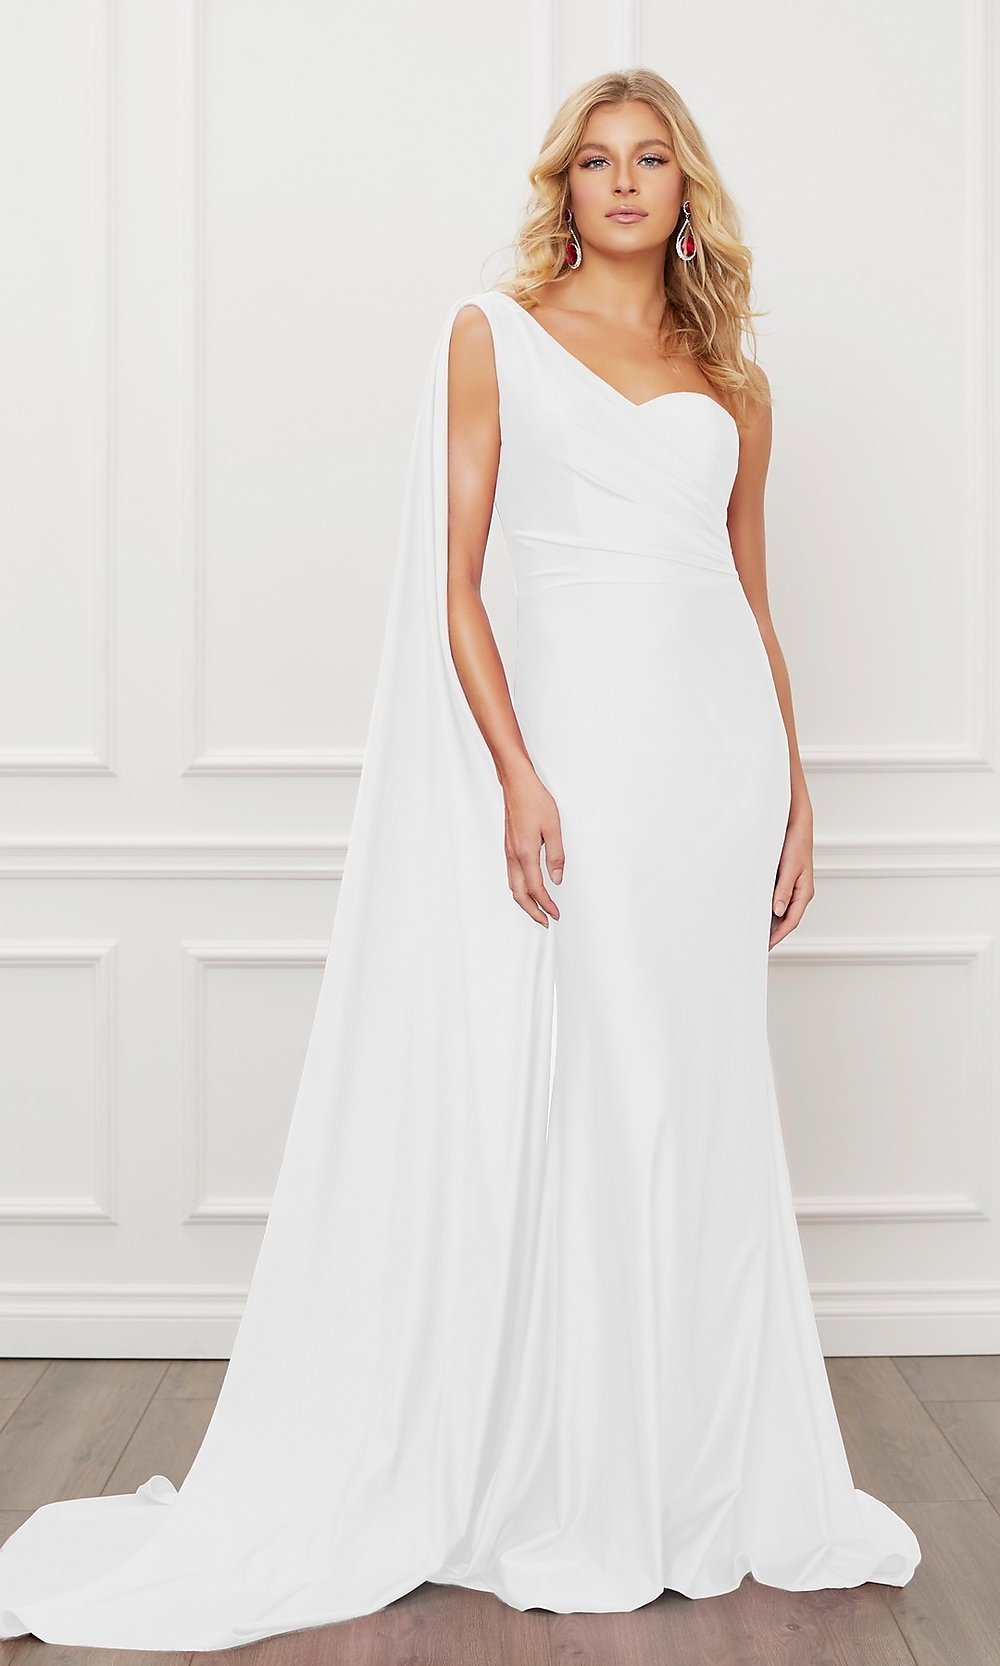 Narianna-White Long Formal Prom Gown with One-Shoulder Cape